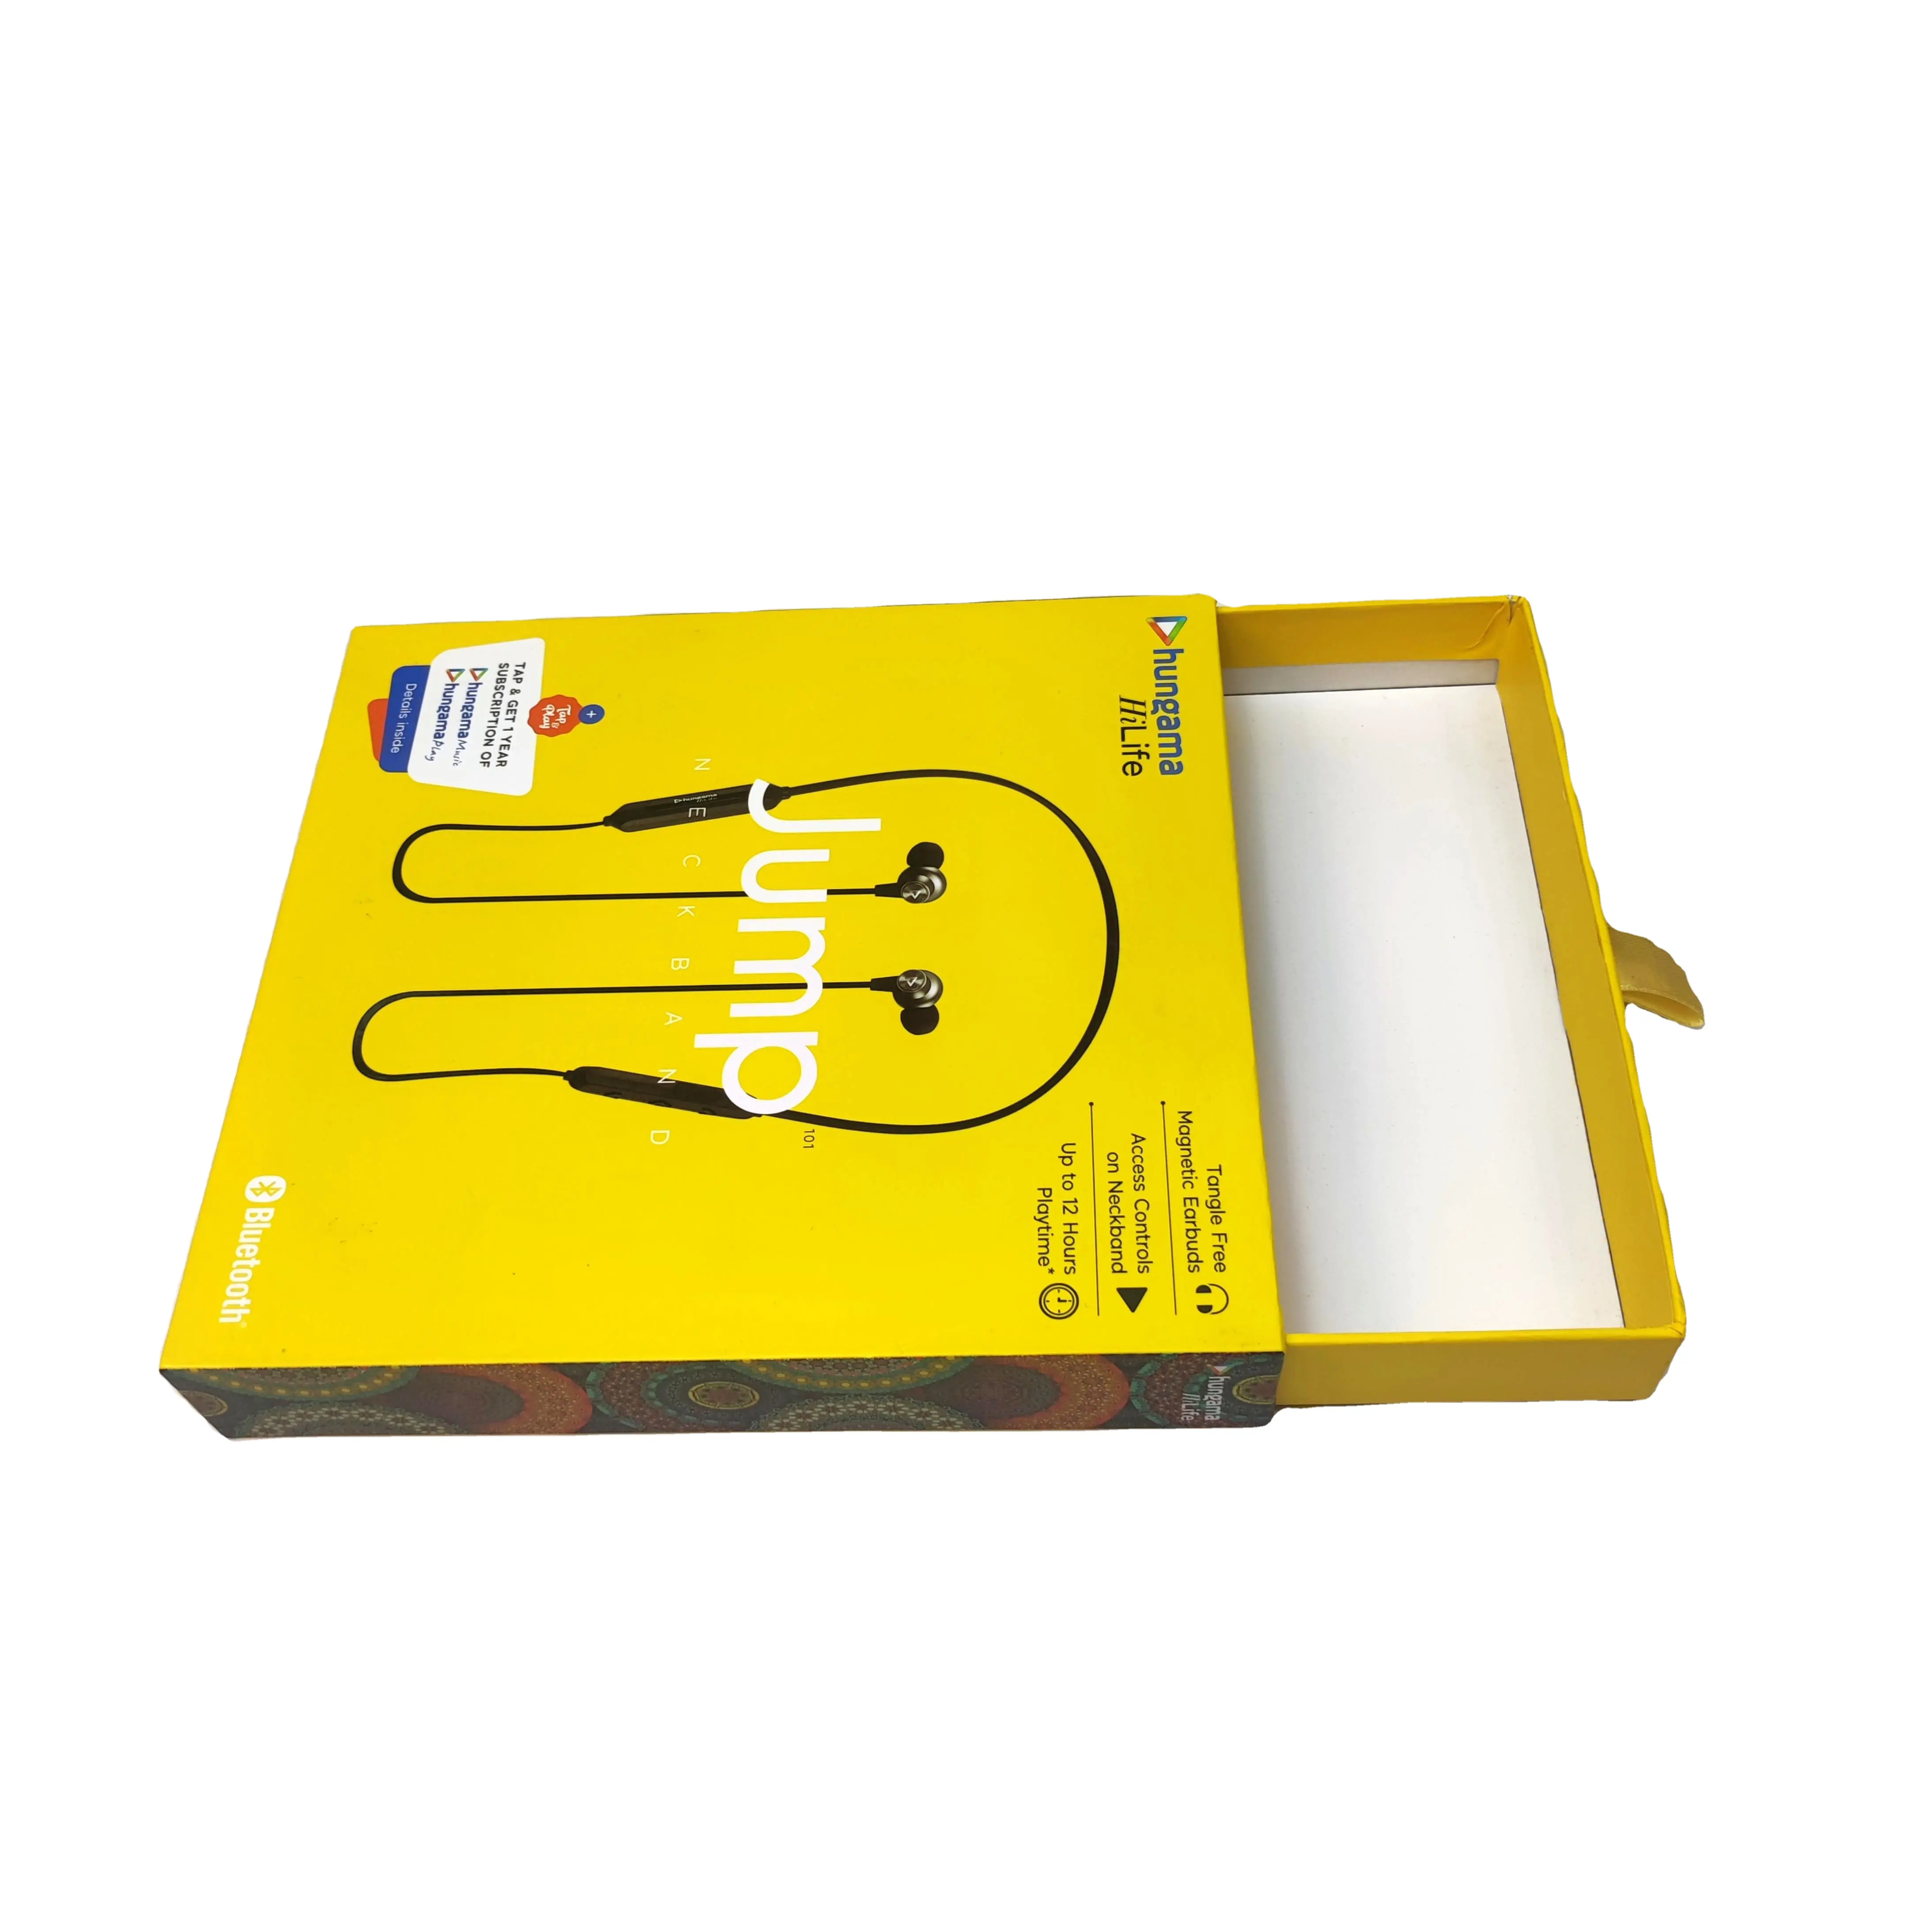 Color Printed Rigid Cardboard Sliding Drawer Box with Blister Tray for Neckband Earphone Packaging Top Bottom Box